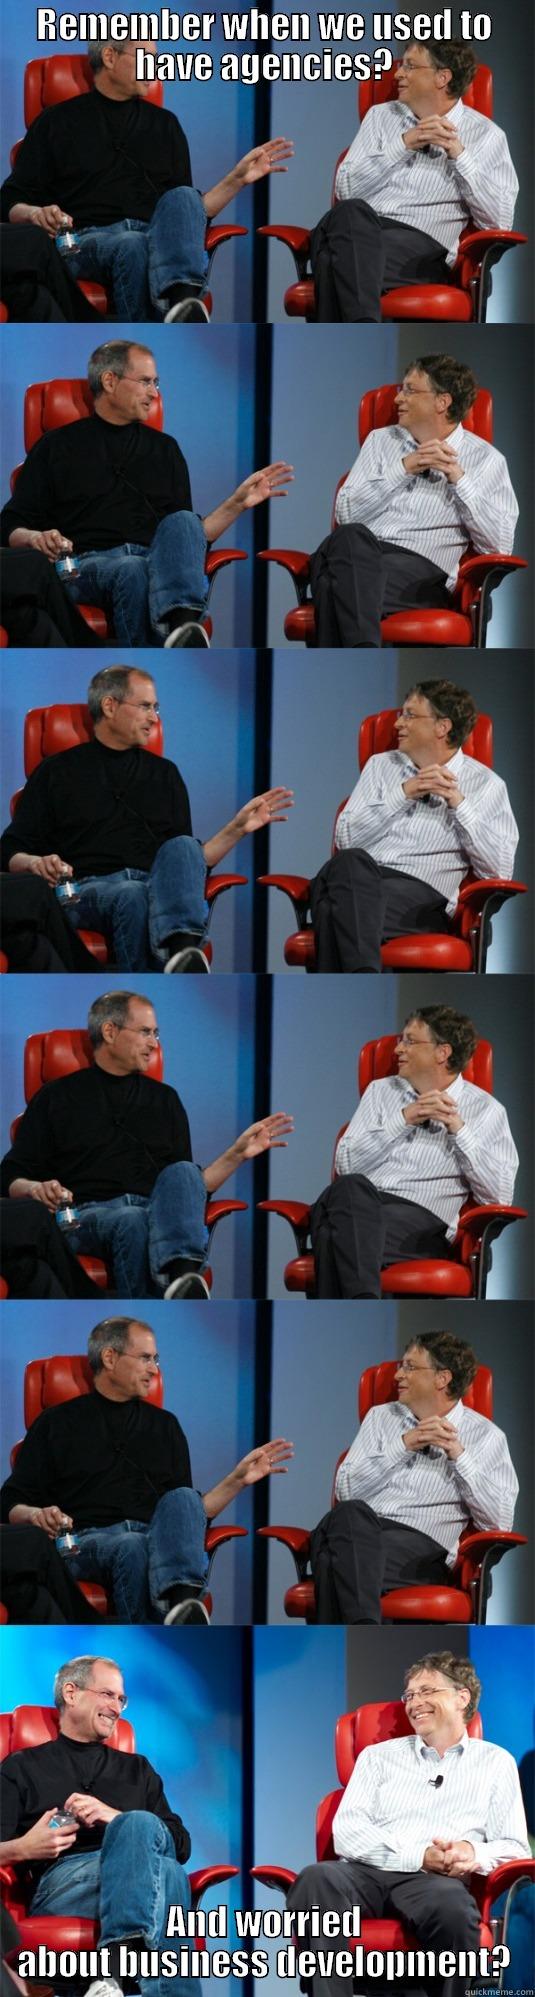 REMEMBER WHEN WE USED TO HAVE AGENCIES? AND WORRIED ABOUT BUSINESS DEVELOPMENT? Steve Jobs vs Bill Gates